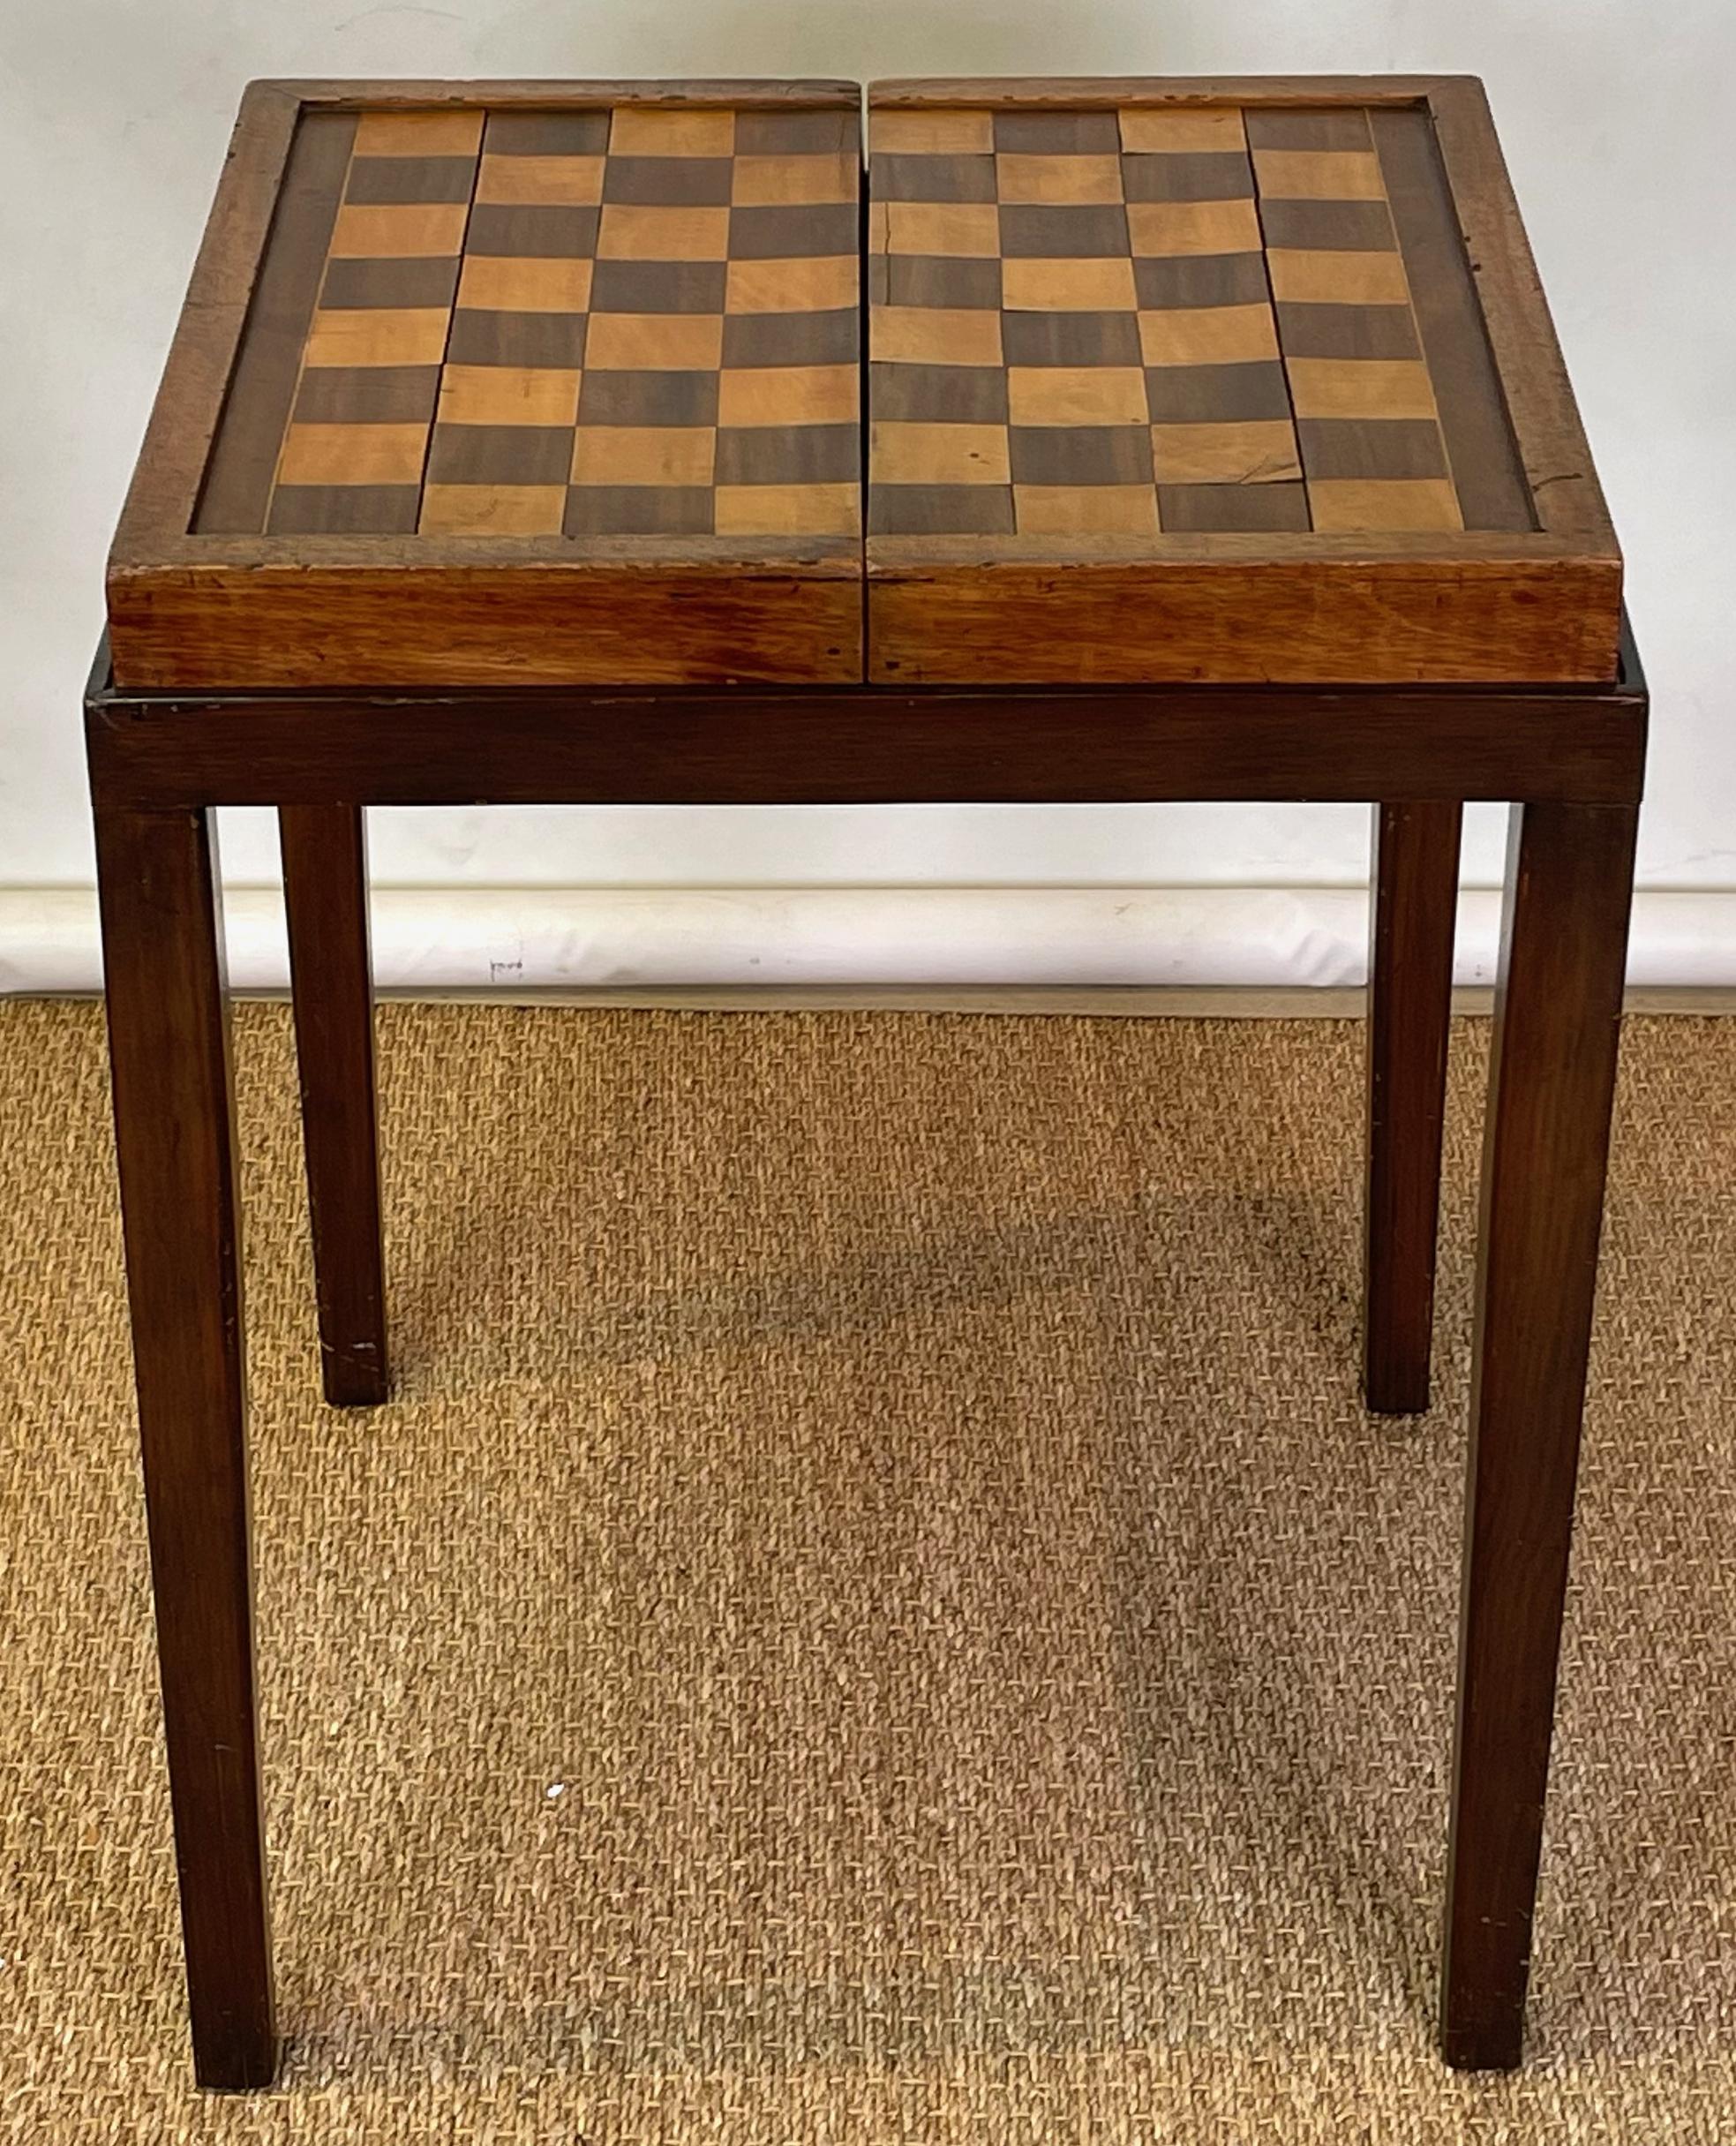 19th Century Small Games Table